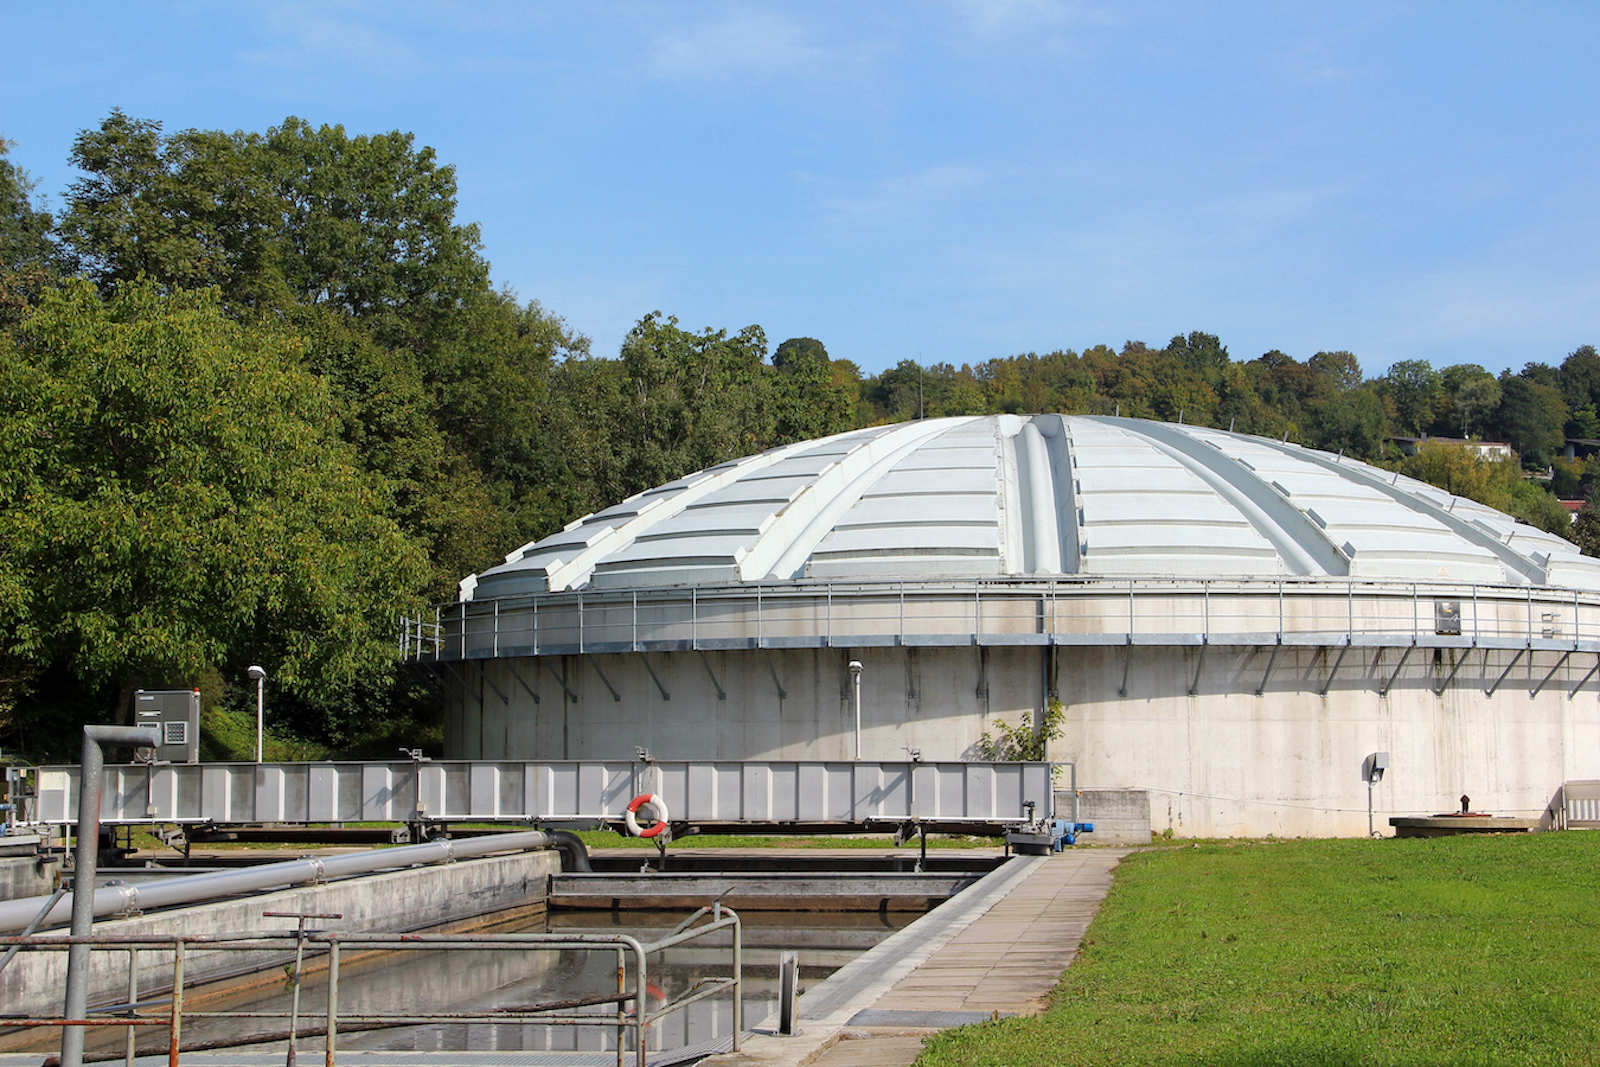 A wastewater treatment plant which consists of a domed building next to a rectangular pool of water.